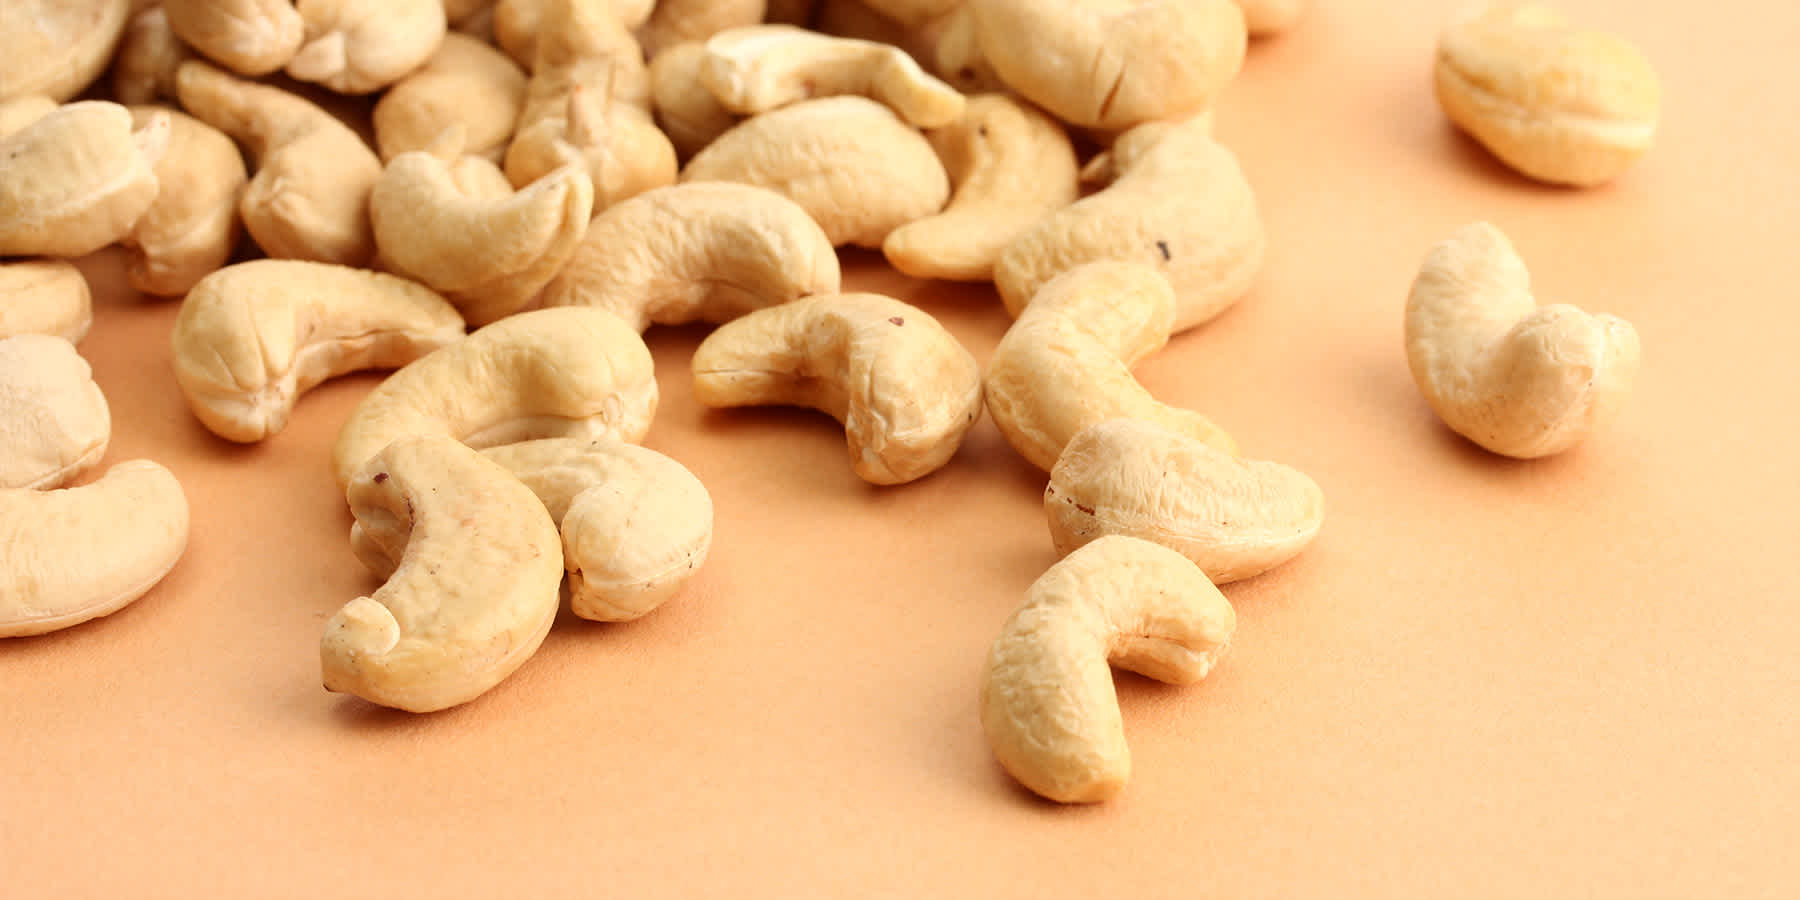 Cashews piled on table to represent protein that may be good for weight loss